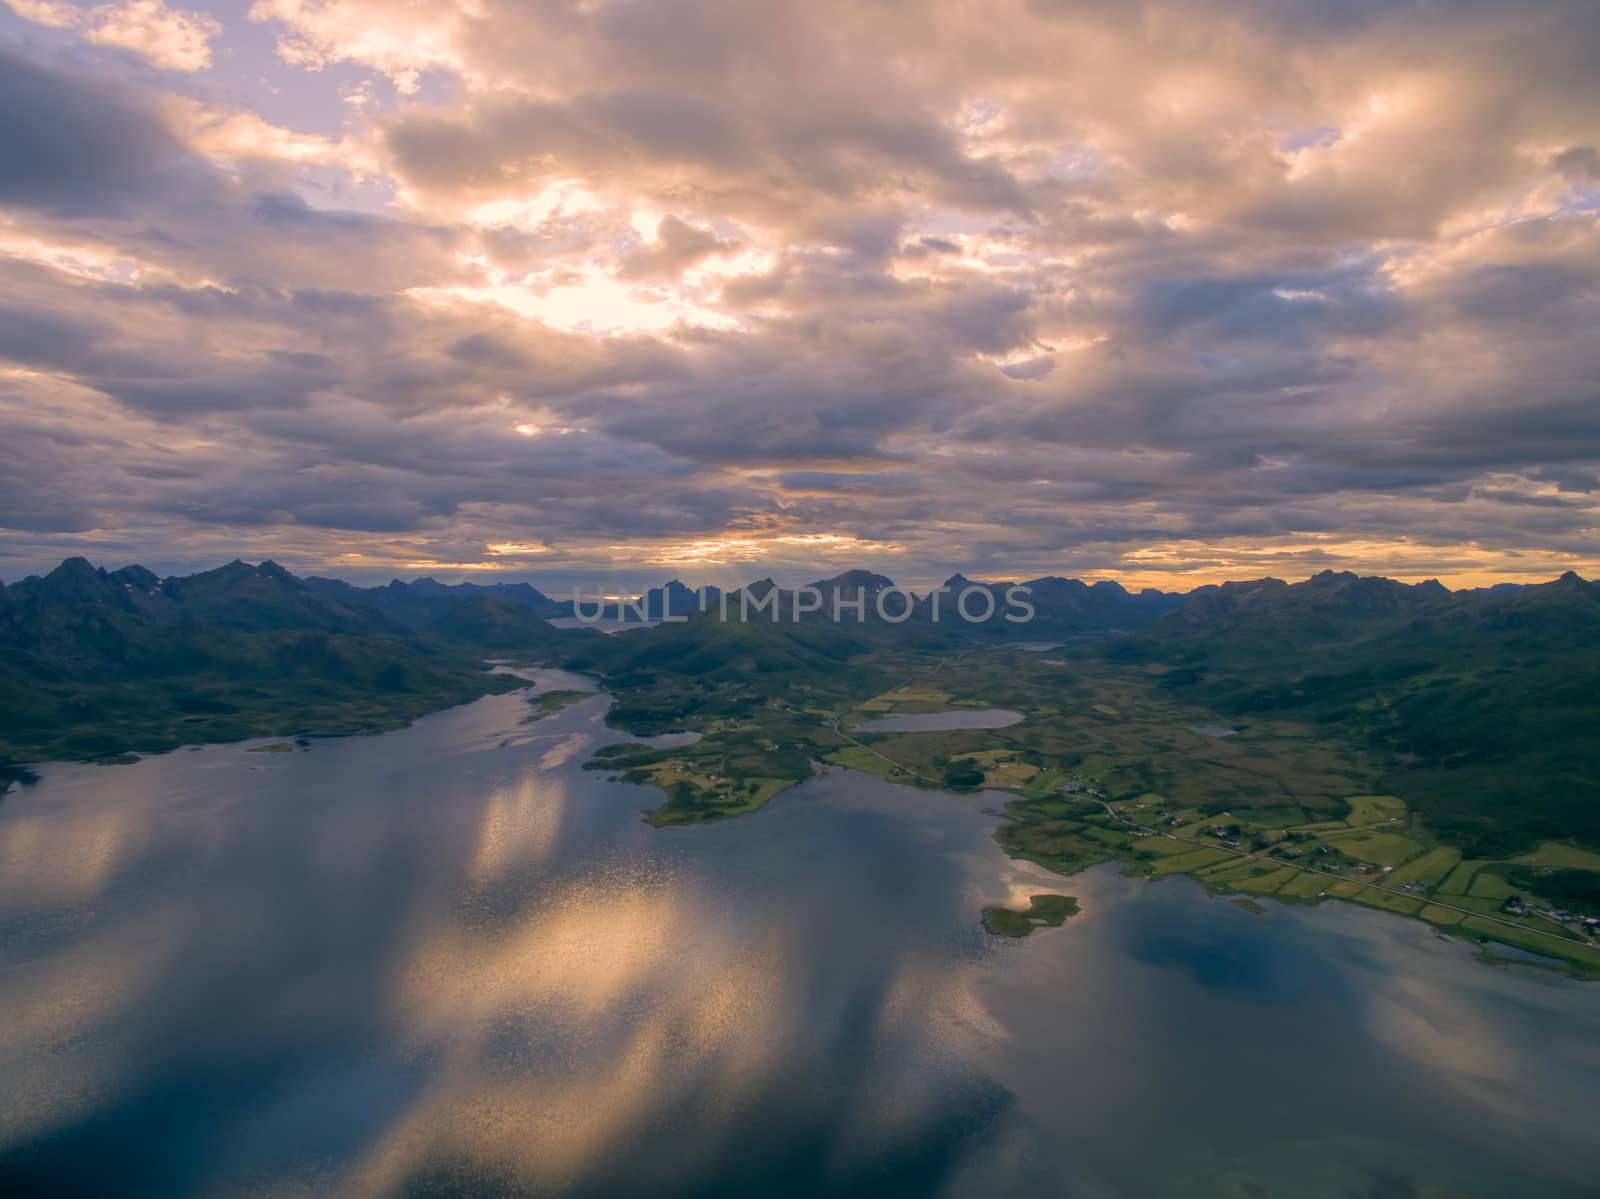 Evening skies above Vesteralen islands with their dramatic mountain peaks, scenic aerial view